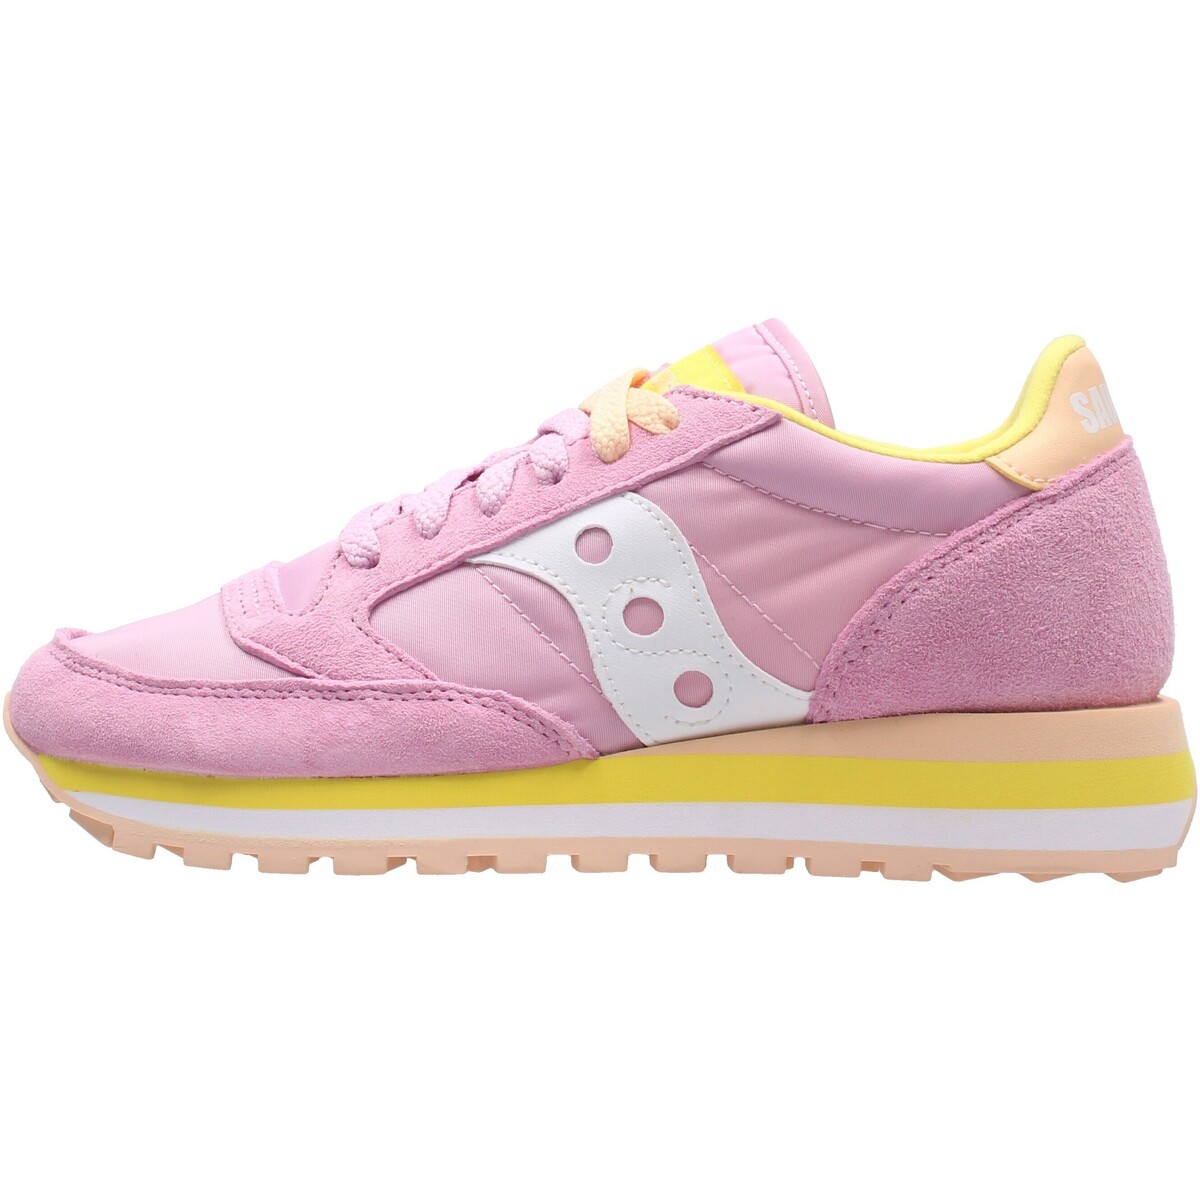 Chaussures Femme trainers saucony jazz 81 s70539 21 blue S60530-18 Rose